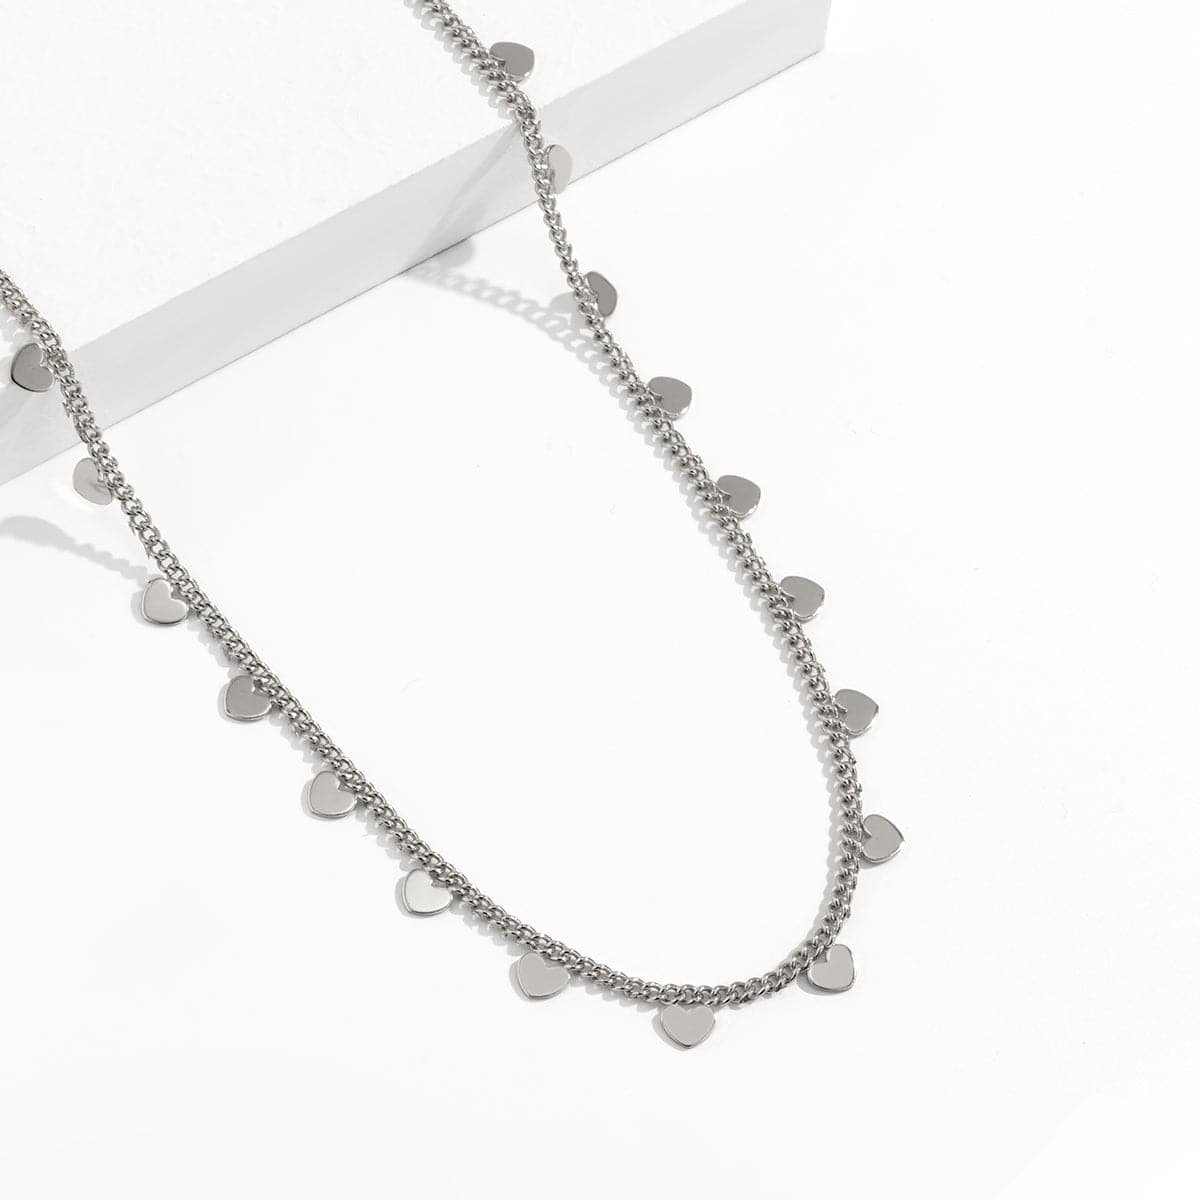 Silver-Plated Heart Station Waist Chain